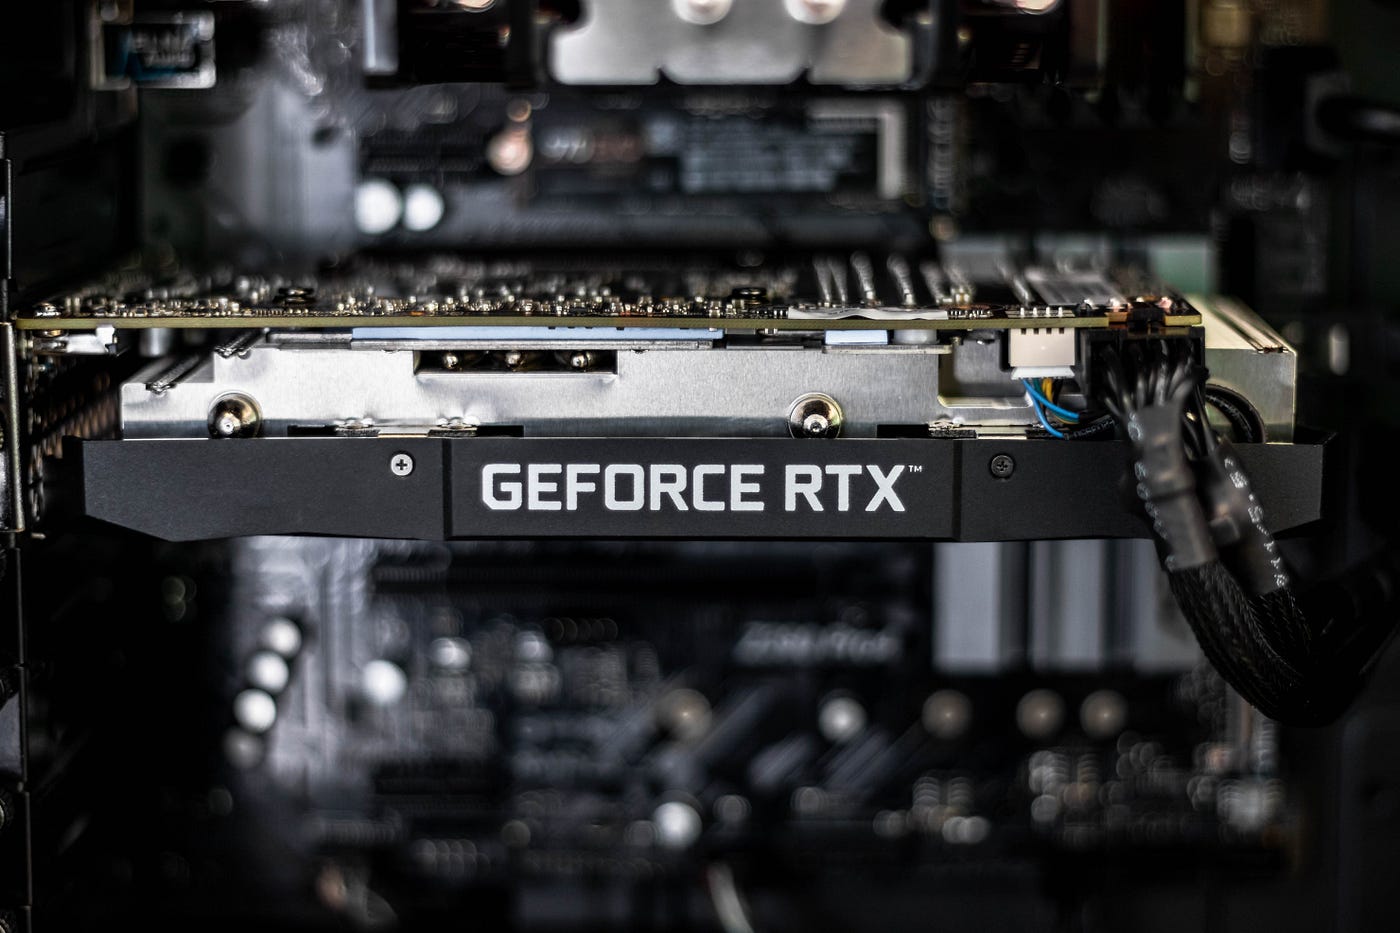 How To Remove A Graphics Card From Motherboard